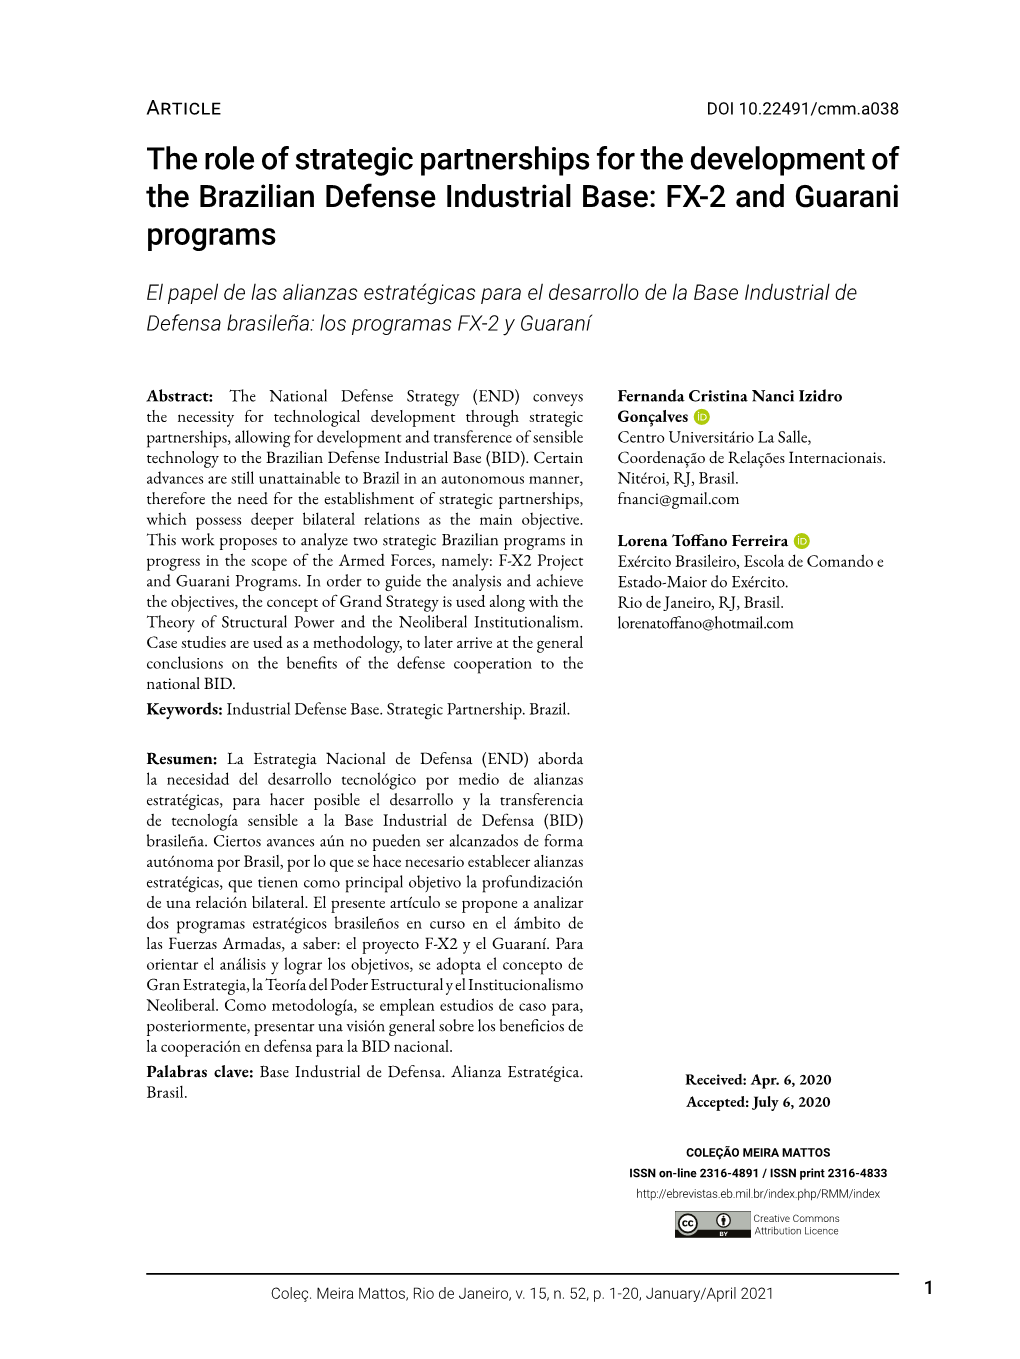 The Role of Strategic Partnerships for the Development of the Brazilian Defense Industrial Base: FX-2 and Guarani Programs